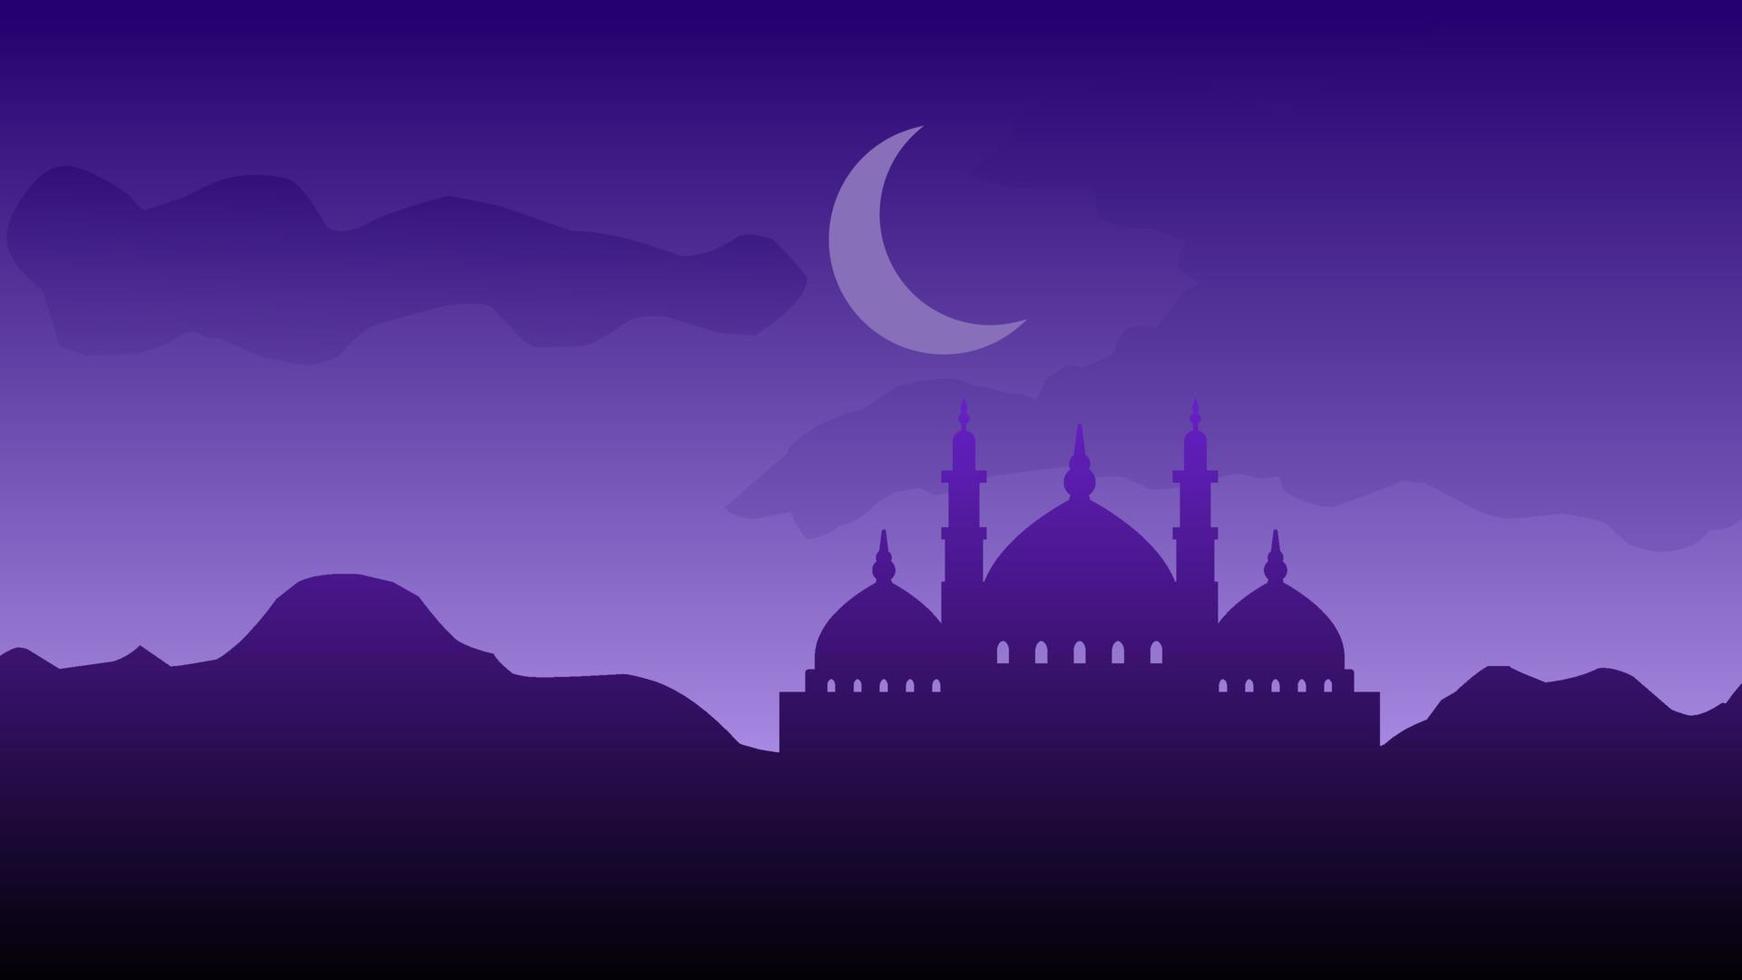 Silhouette landscape of mosque with shiny purple sky for ramadan design graphic in muslim culture and islam religion. Vector illustration of background mosque in the night for Islamic wallpaper design